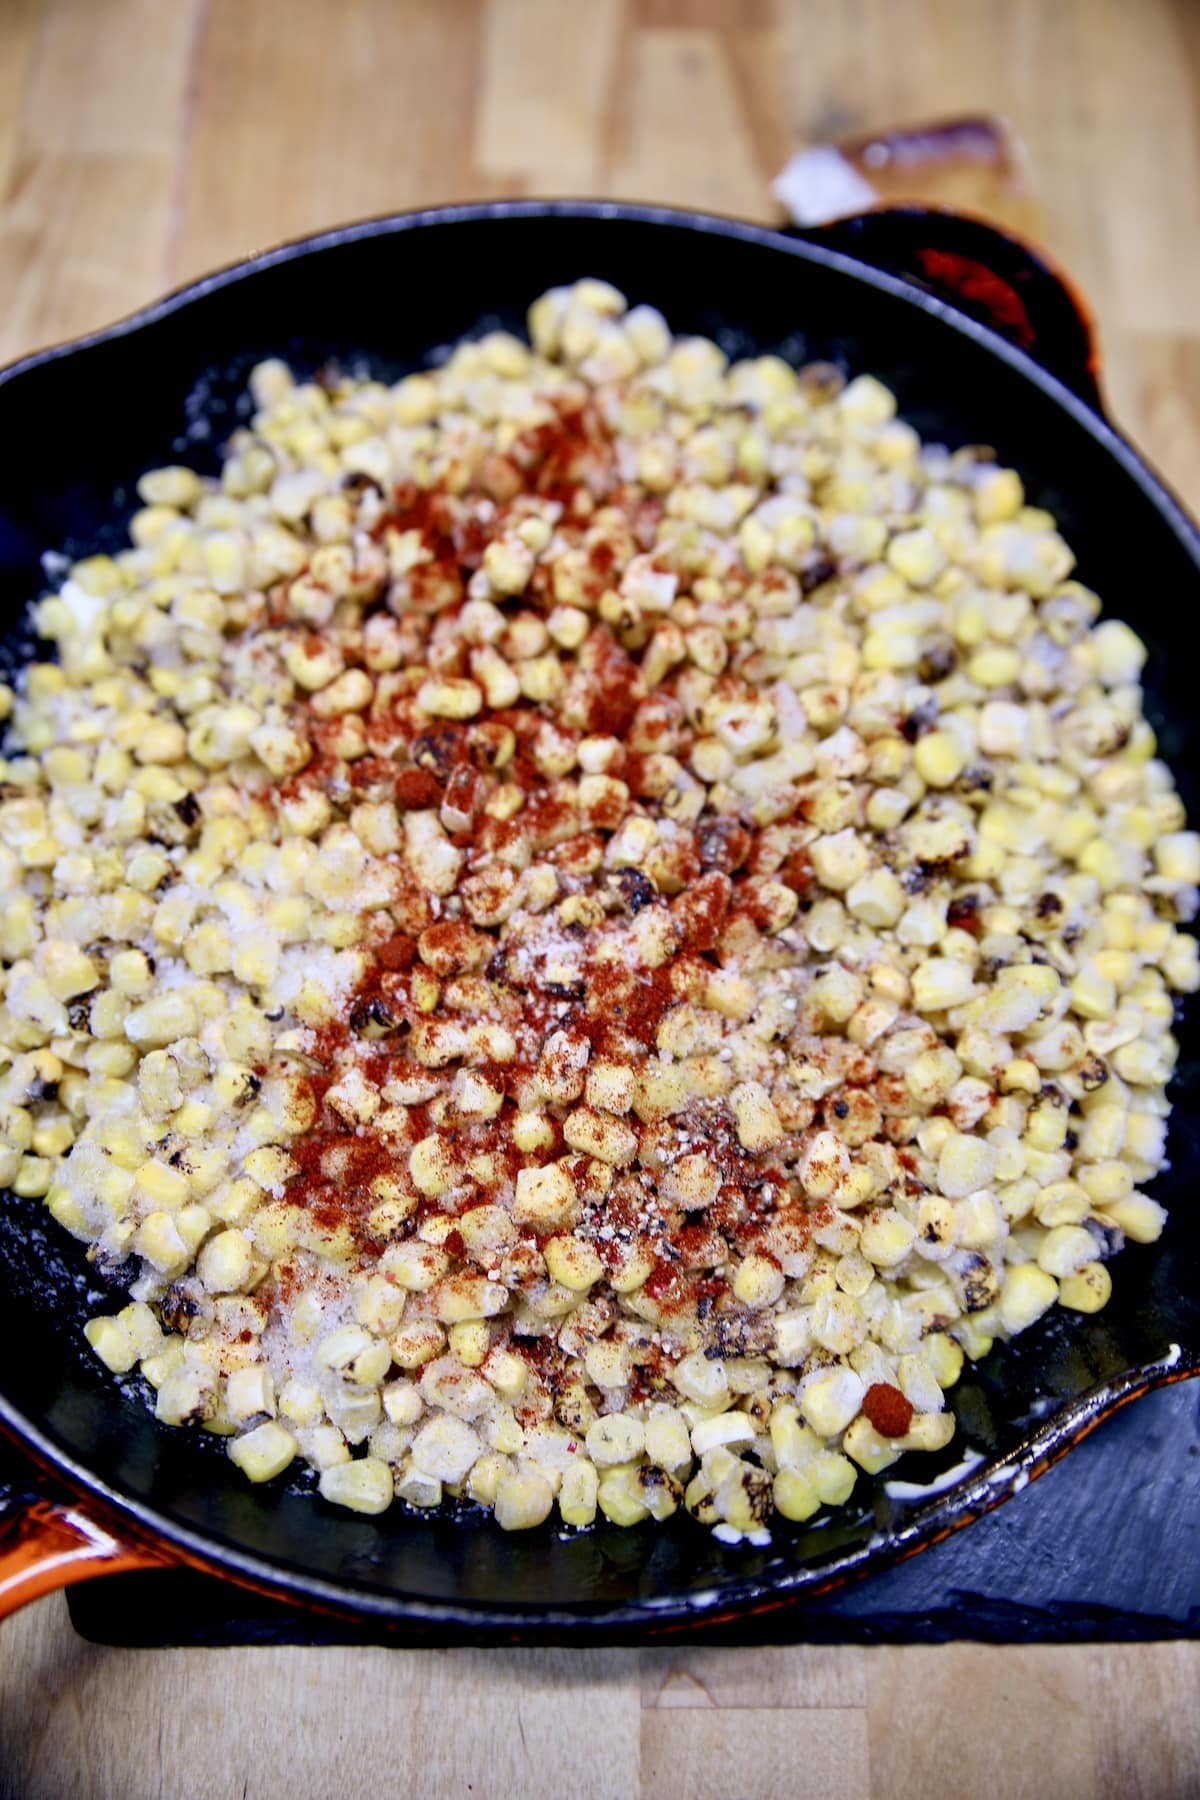 Corn in a skillet with spices.